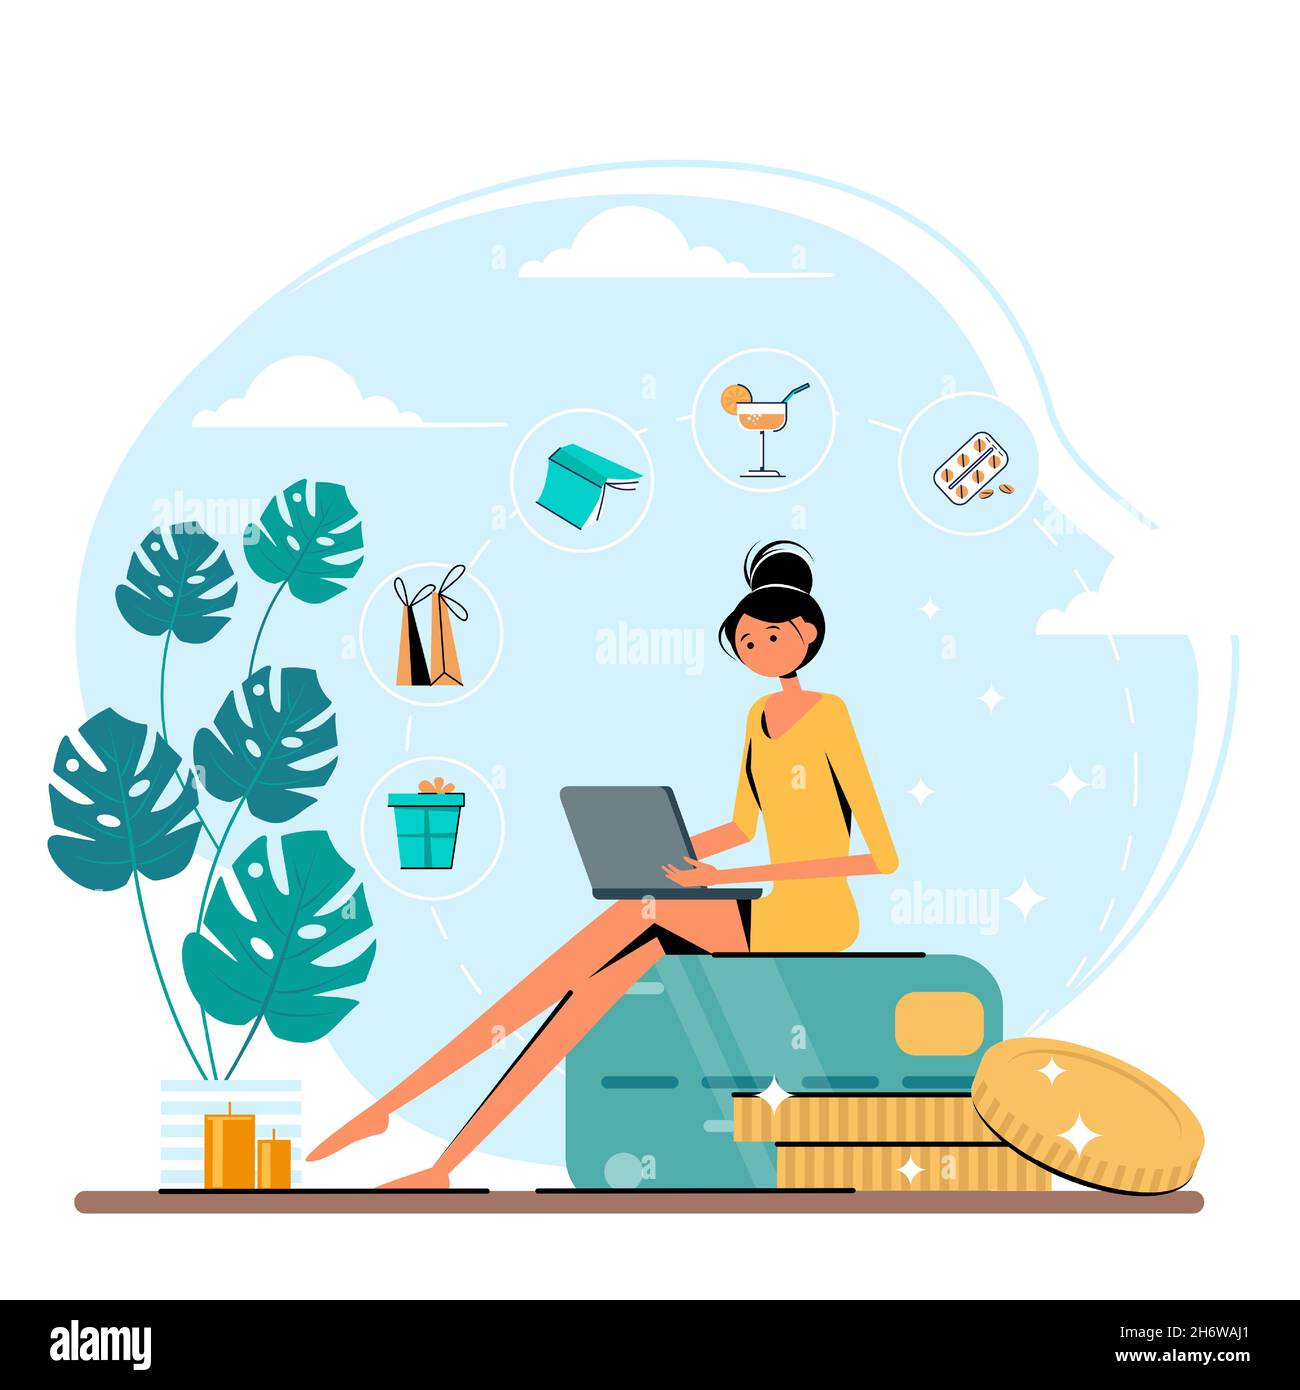 Online shopping concept with woman and credit card. Cute woman sits on a credit card and chooses what to order in a laptop. Vector illustration. Stock Vector